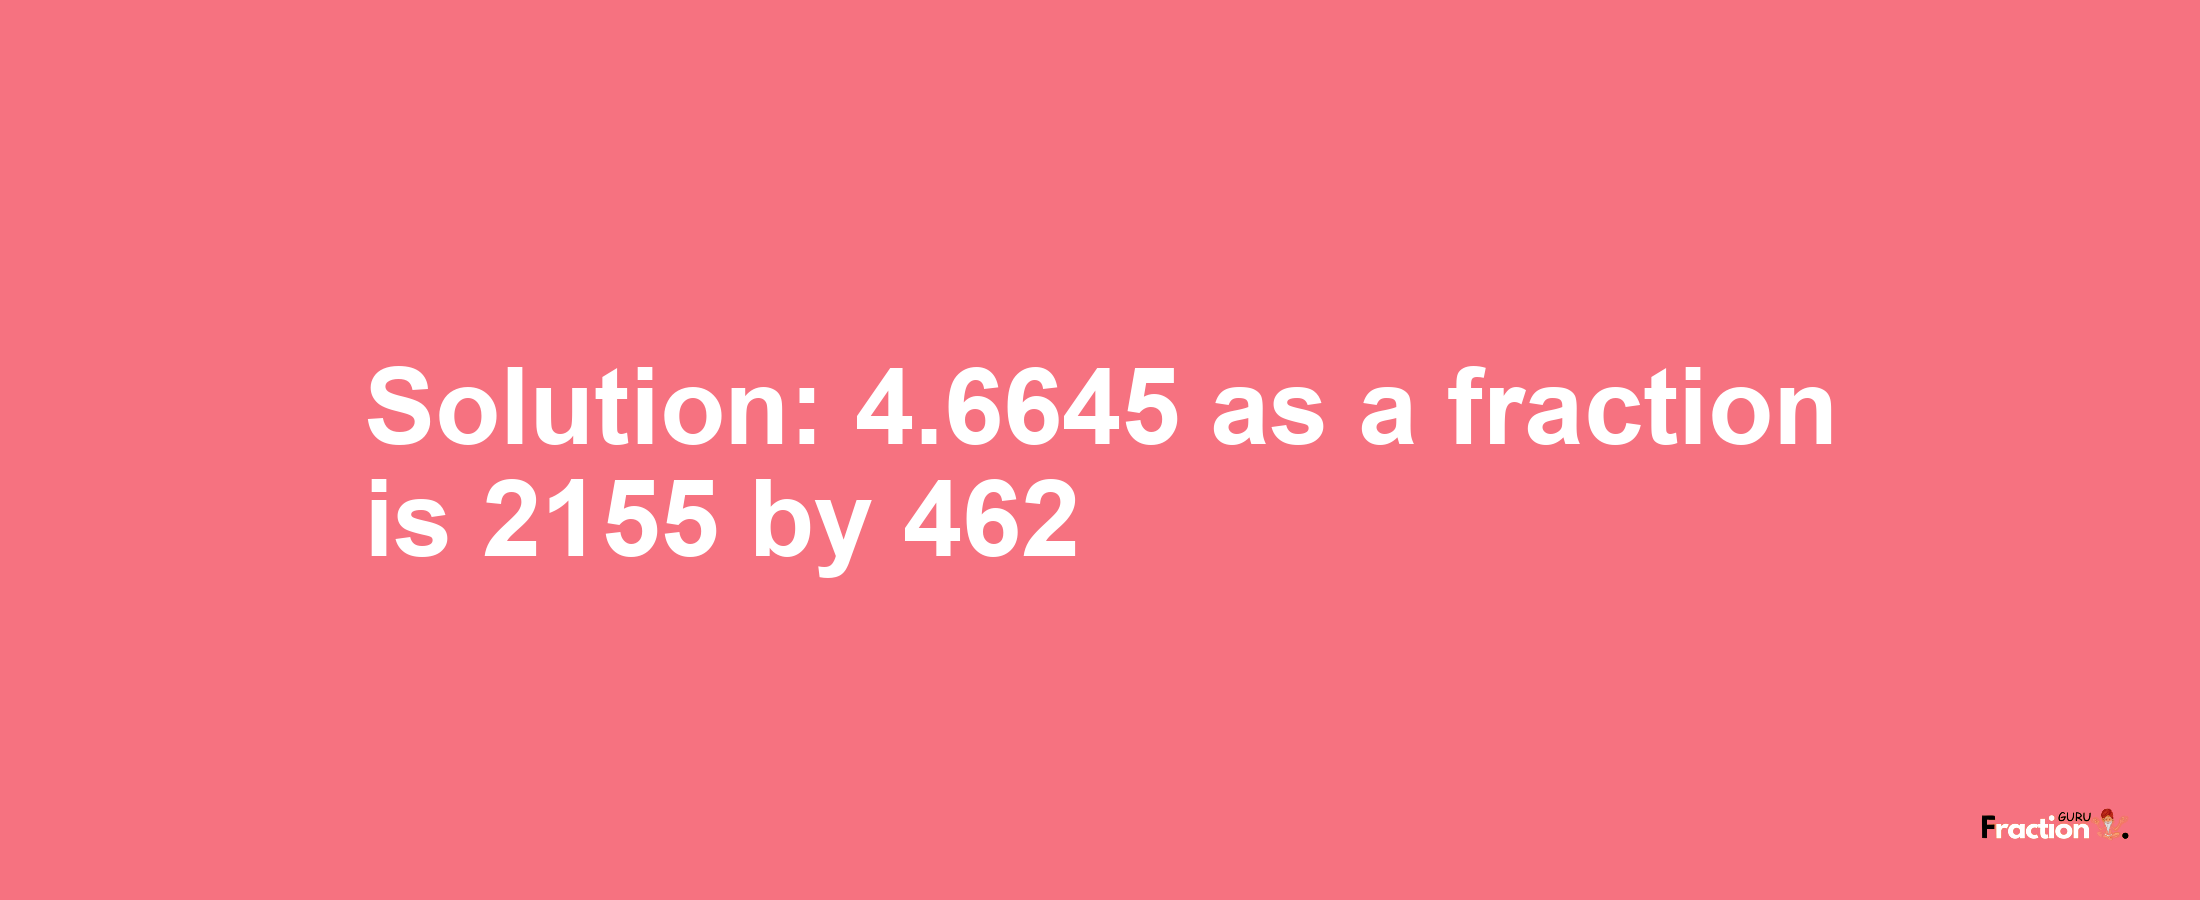 Solution:4.6645 as a fraction is 2155/462